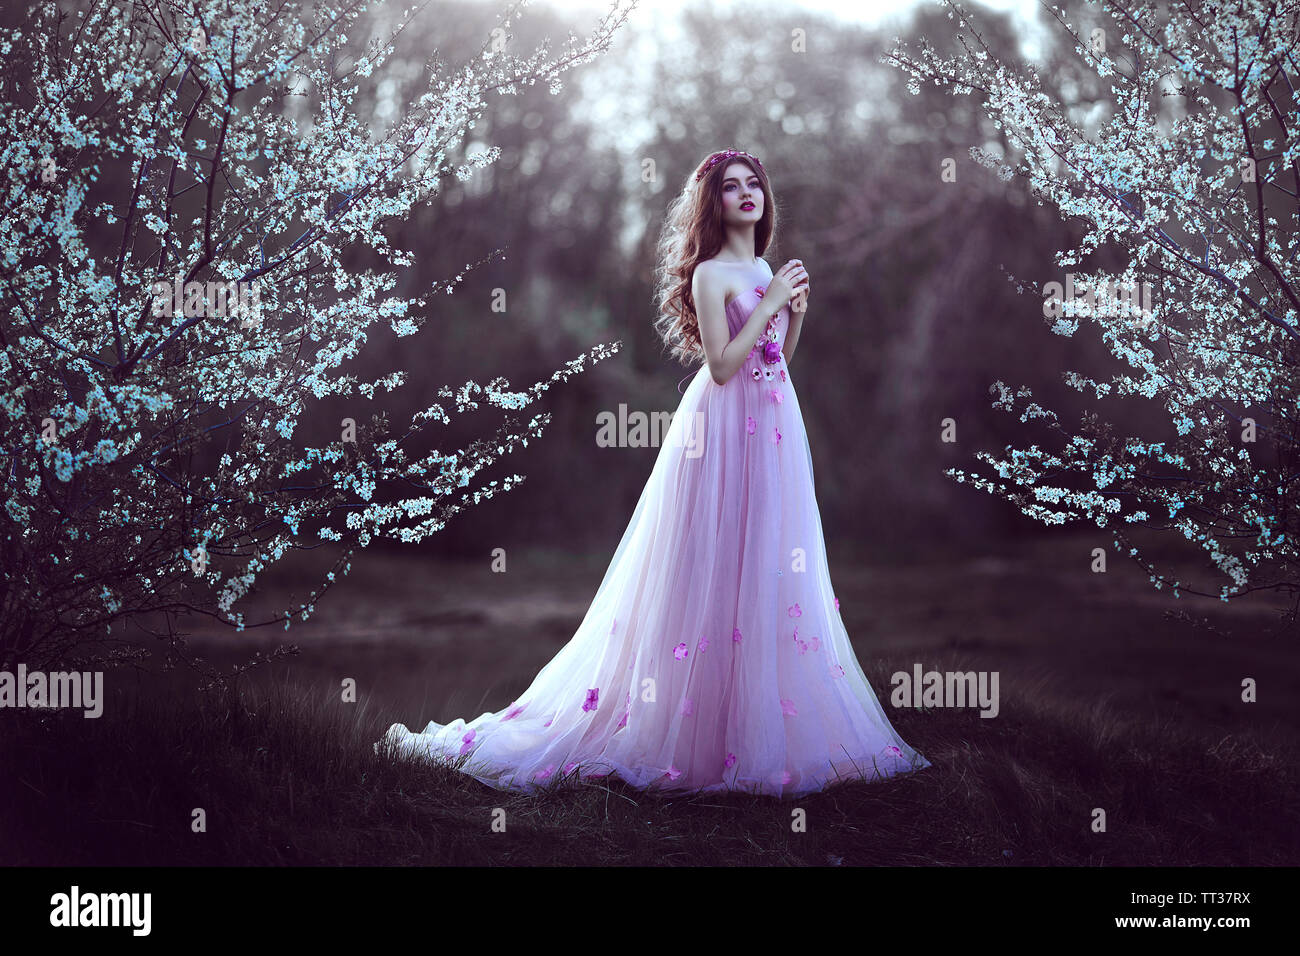 Beautiful Romantic Girl with long hair in fairy long pink dress standing near flowering tree.Fantasy art. Creative colors and Artistic processing. Stock Photo